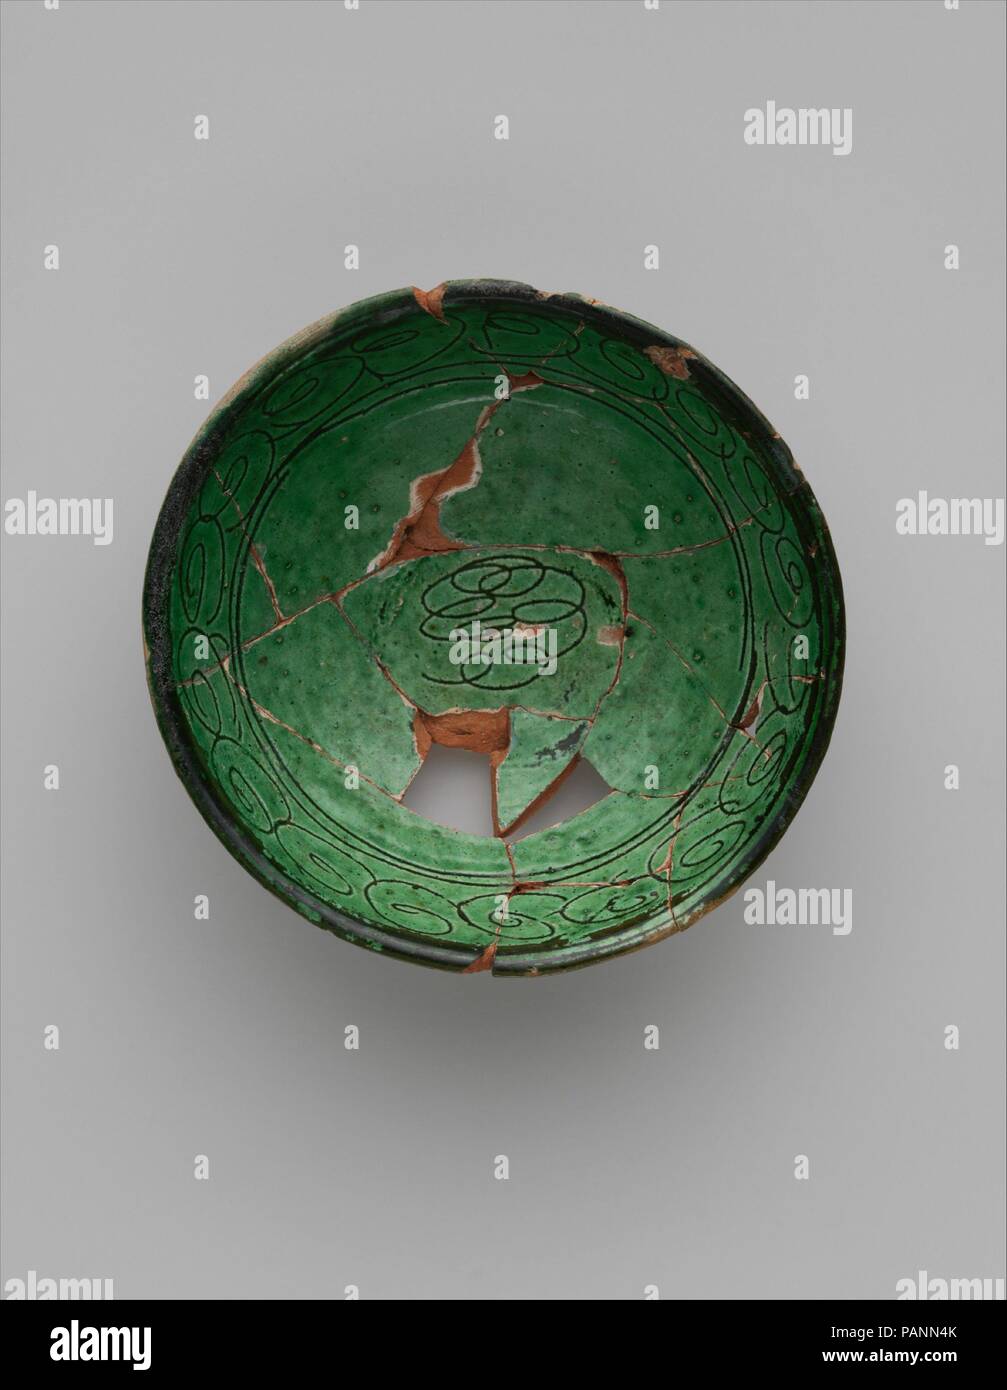 Green Glazed Bowl with Incised Decoration. Dimensions: H. 1 7/8 in. (4.8 cm)  Diam. 5 3/16 in. (13.2 cm). Date: 9th century.  A very unusual object in the Nishapur finds, the decoration of this bowl was decorated made by scratching a design into white slip and then dipping the vessel into a transparent green glaze. The production of this bowl cannot be attributed with certainty to a specific location. Museum: Metropolitan Museum of Art, New York, USA. Stock Photo